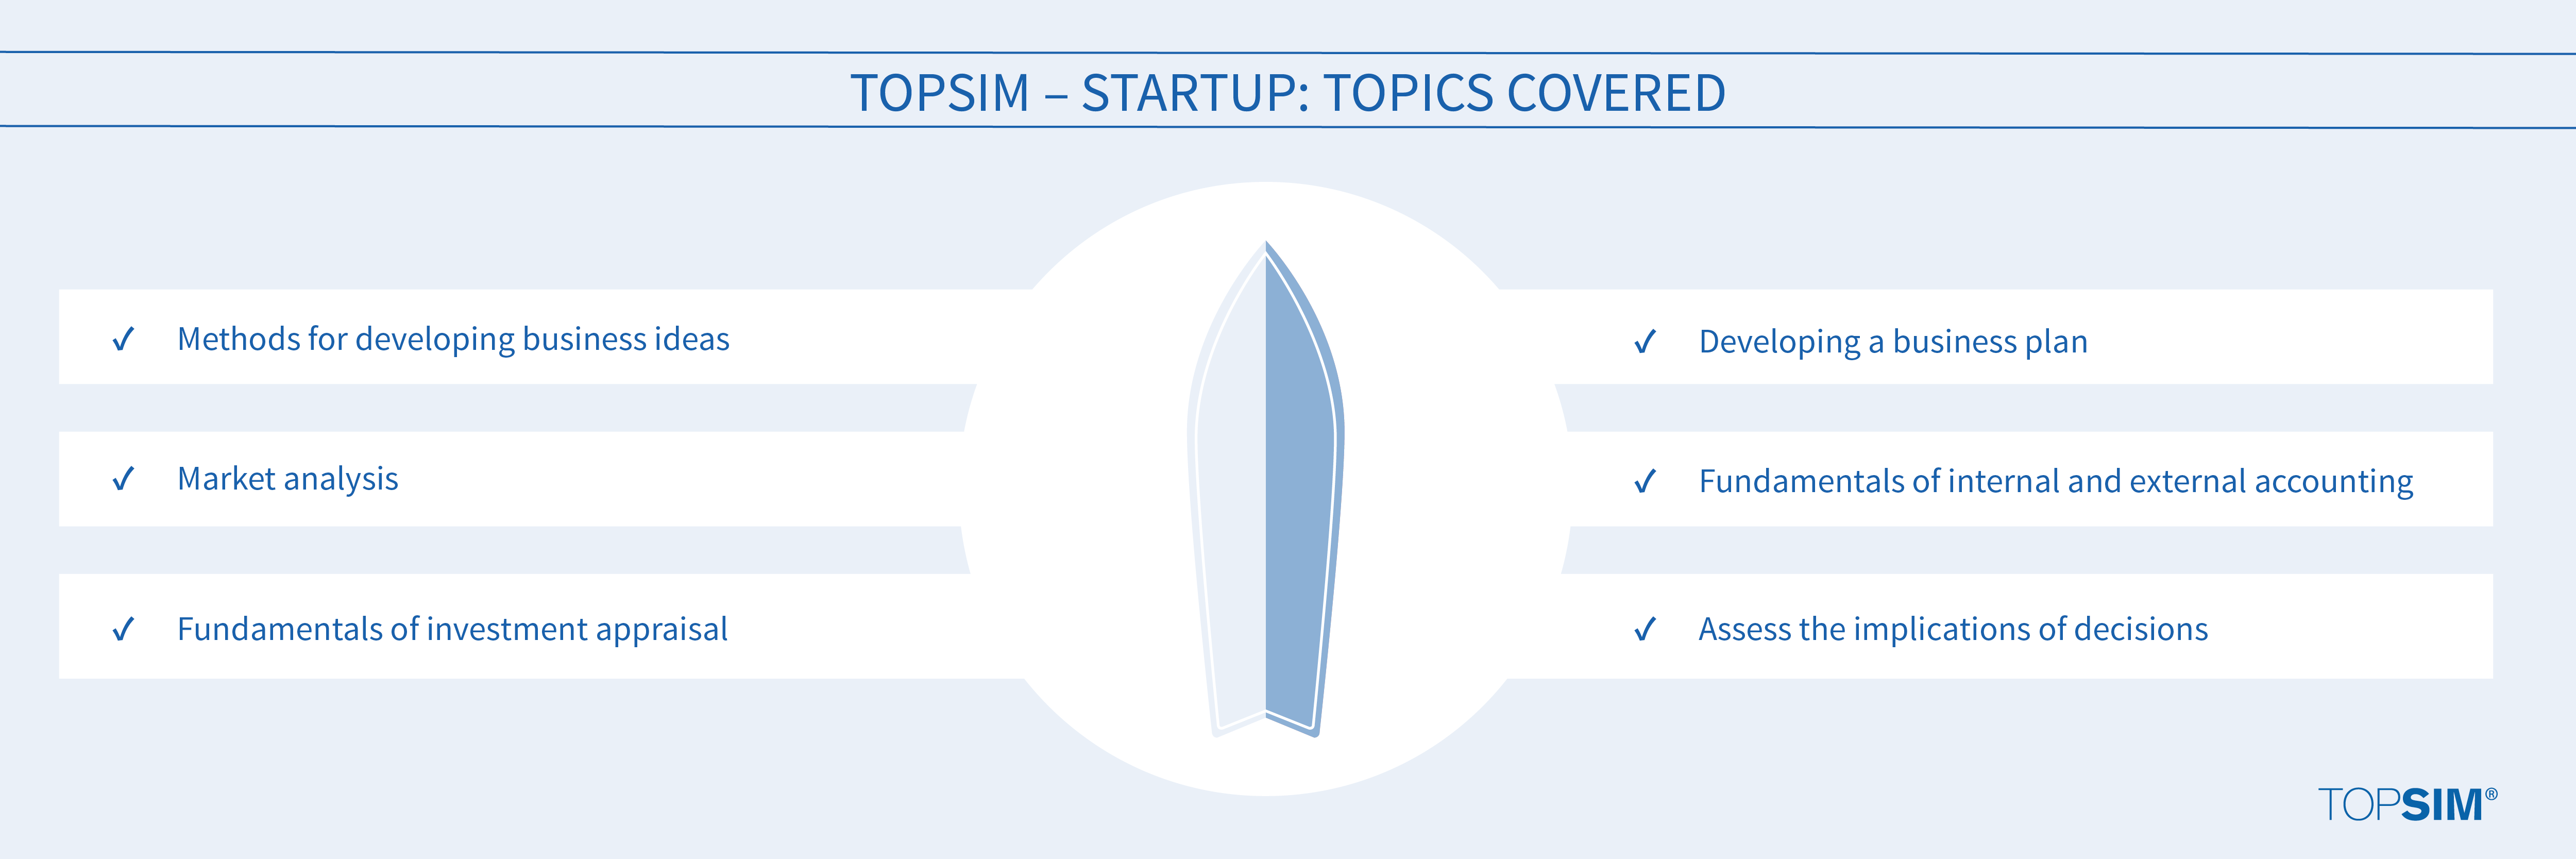 Topics covered Startup